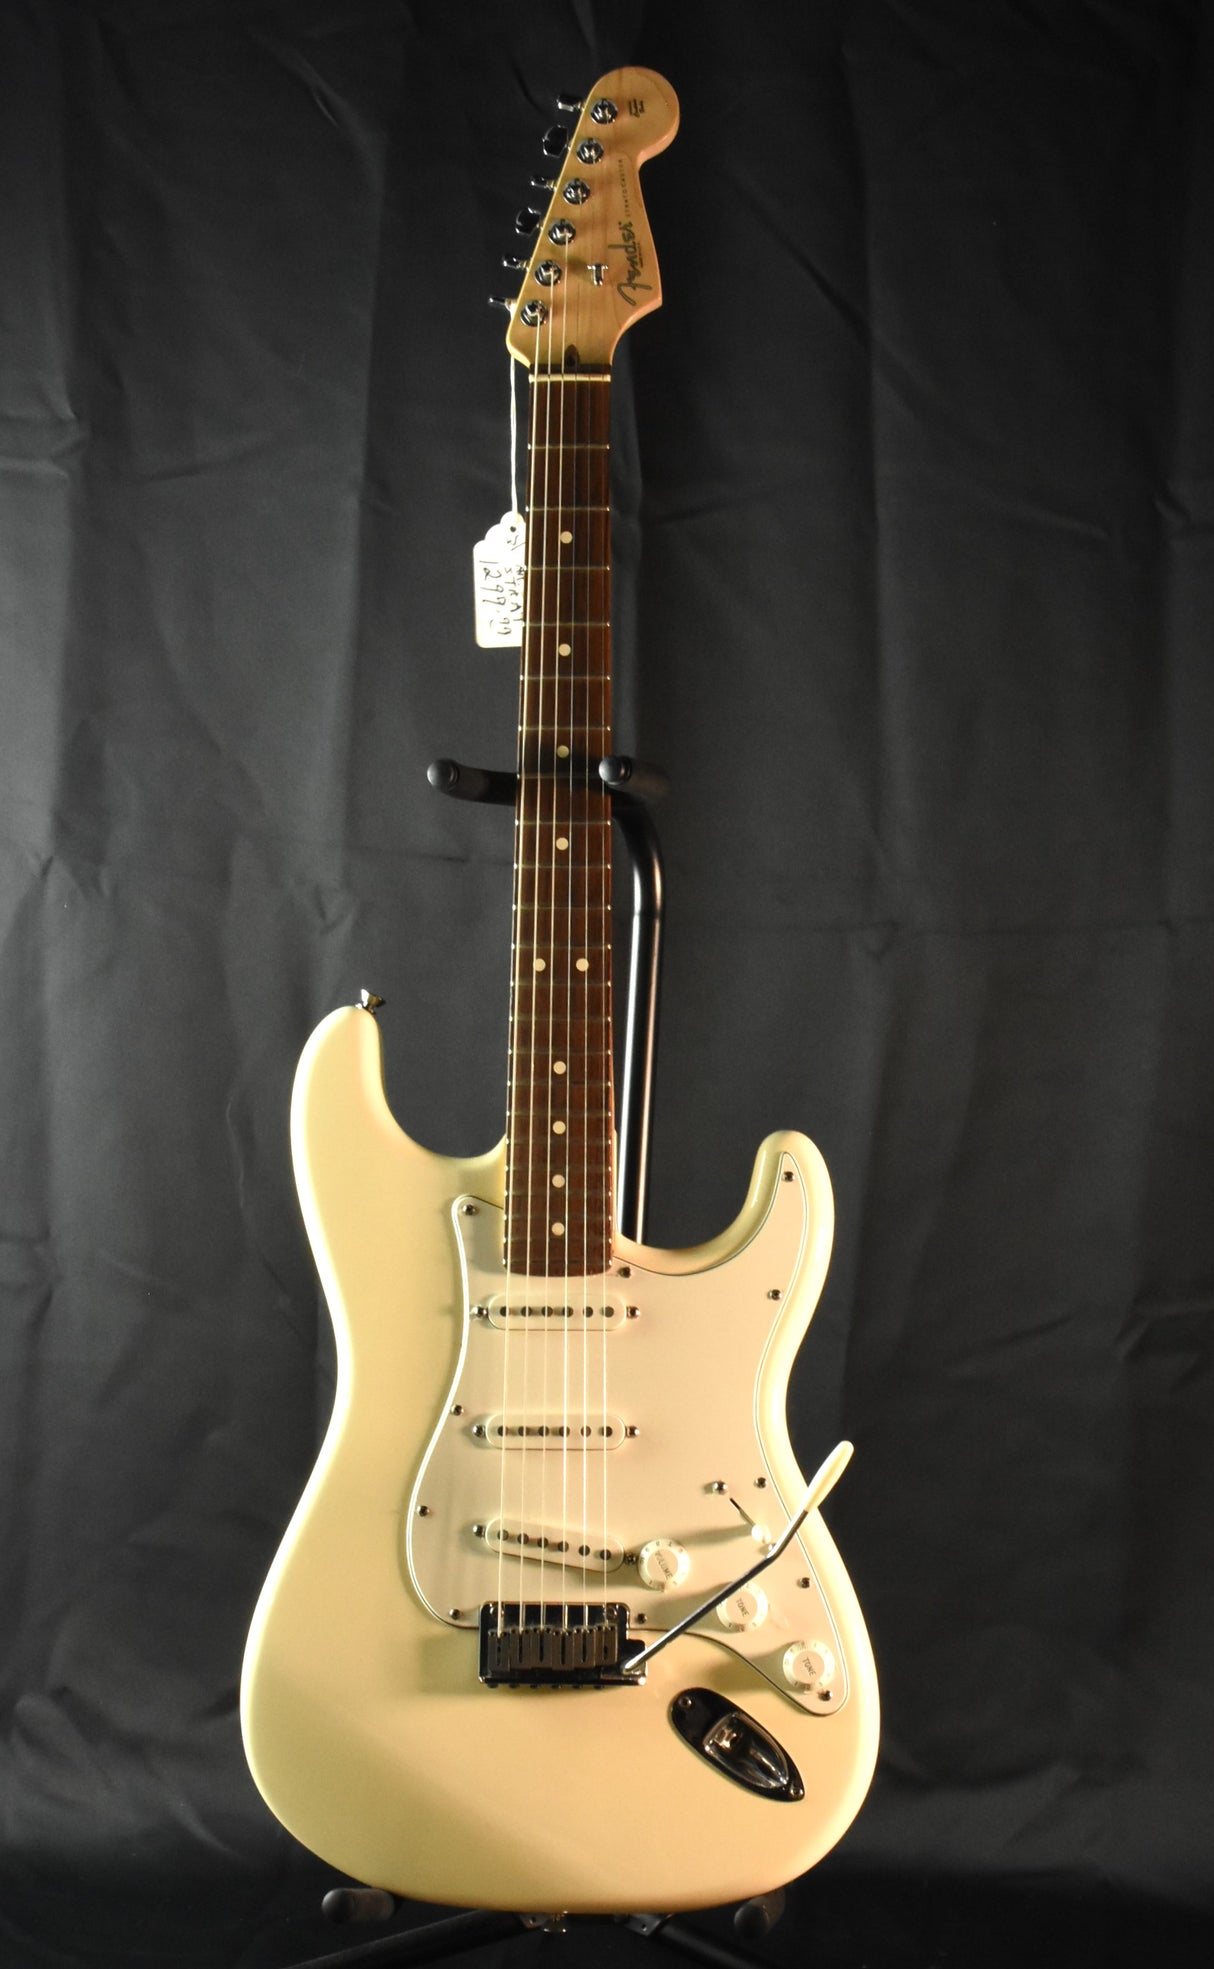 Used Fender American Strat with Rosewood Fingerboard in Olympic White